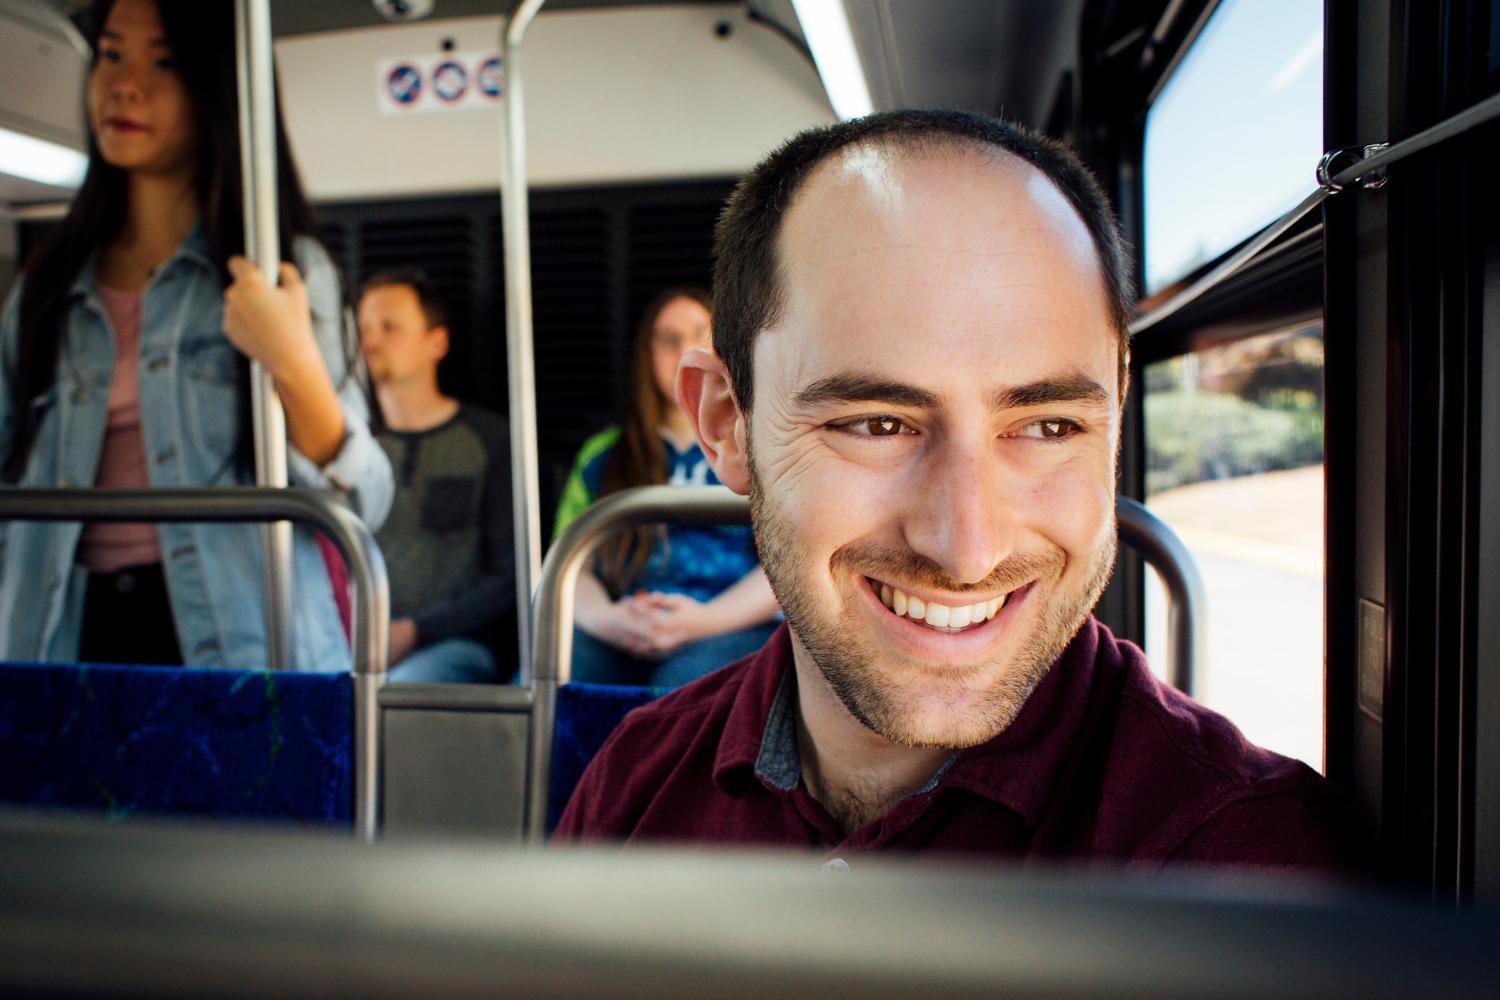 A man smiling and looking out the bus window. Other people are riding the bus in the background.